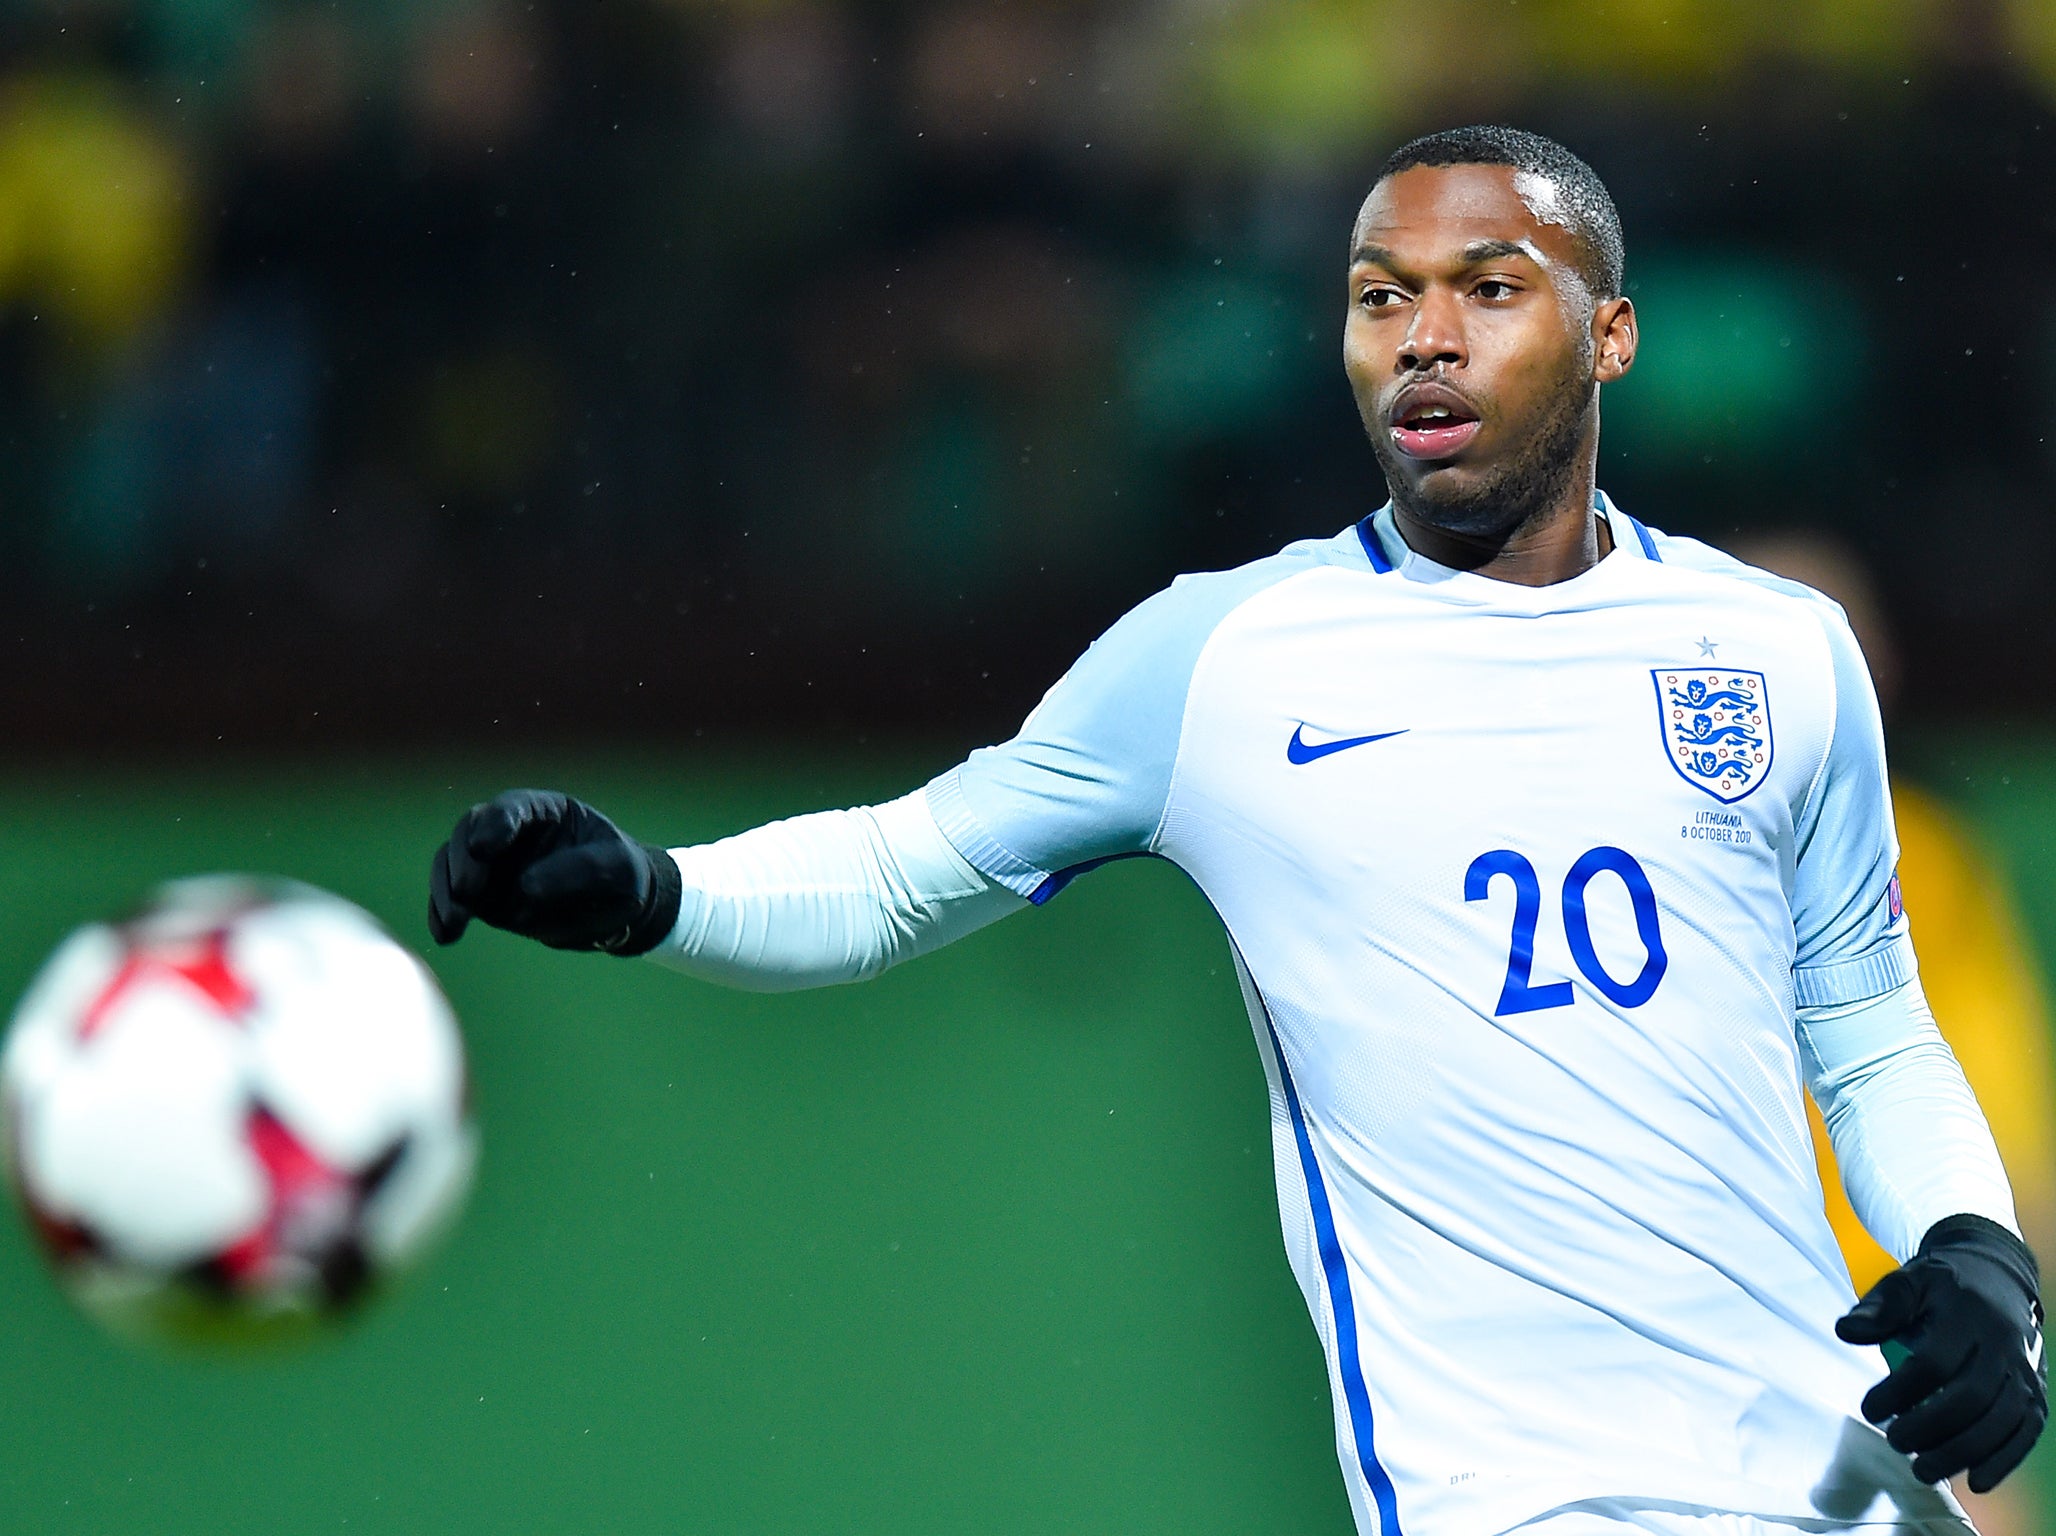 Sturridge only played for England once last year